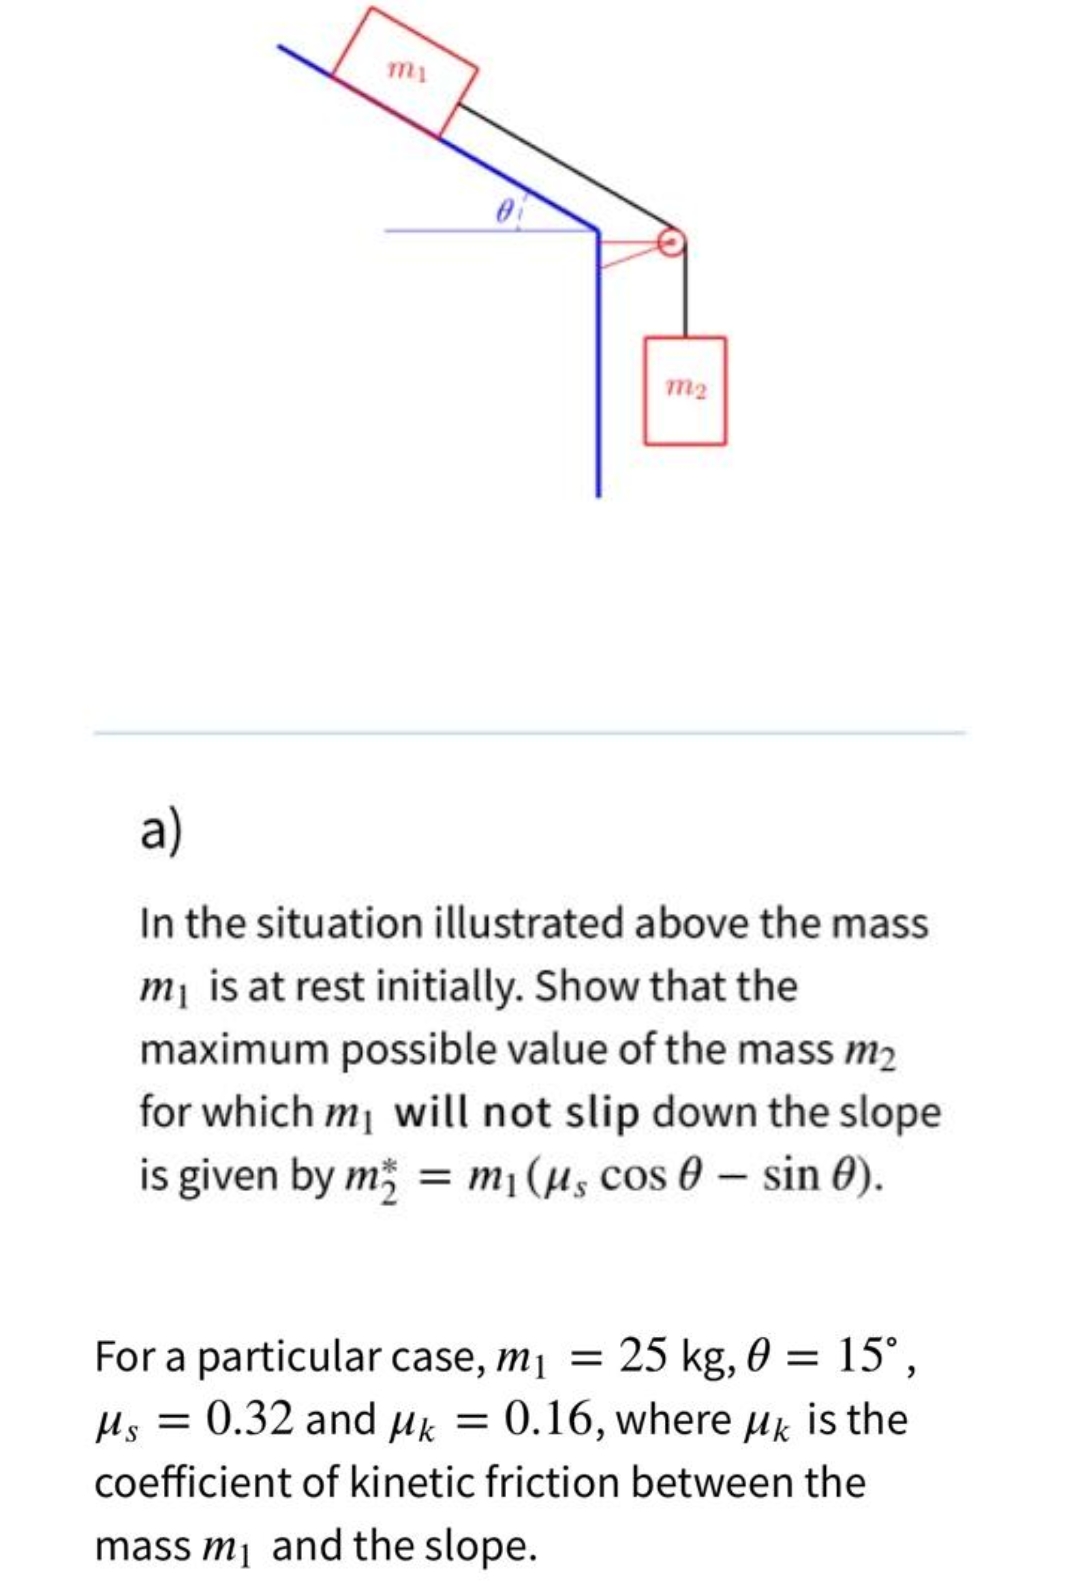 0
m2
a)
In the situation illustrated above the mass
m₁ is at rest initially. Show that the
maximum possible value of the mass m₂
for which my will not slip down the slope
is given by m = m₁ (μs cos 0 - sin 0).
For a particular case, m₁ = 25 kg, 0 = 15°,
Ms = 0.32 and μk = 0.16, where μk is the
coefficient of kinetic friction between the
mass m₁ and the slope.